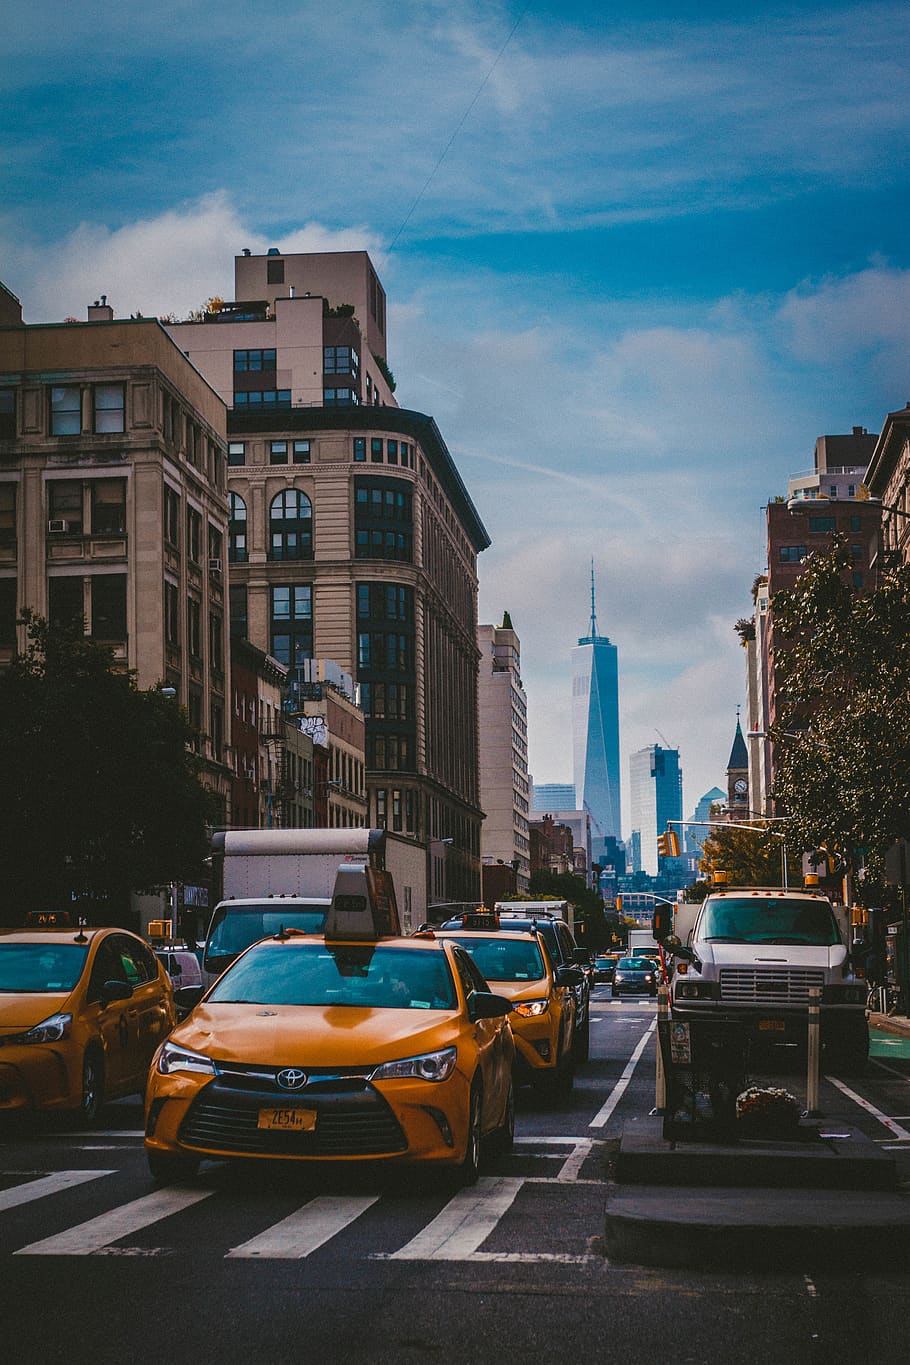 A busy city street with cars and taxis - New York